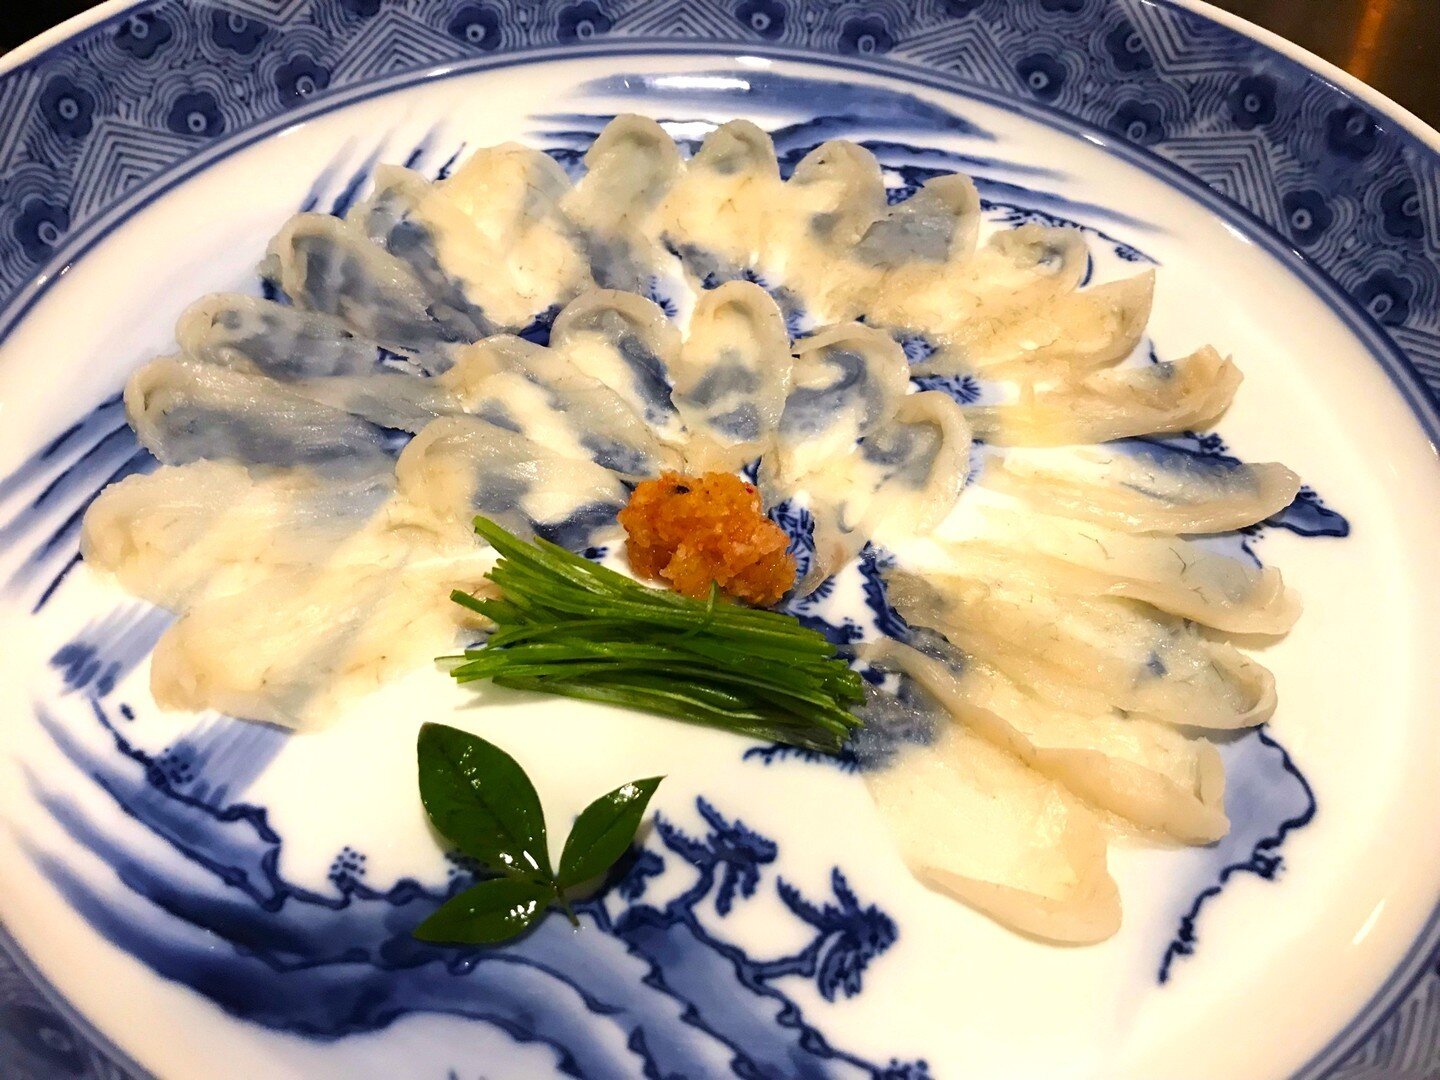 FUGU Pufferfish Course available now!
Book via Tock